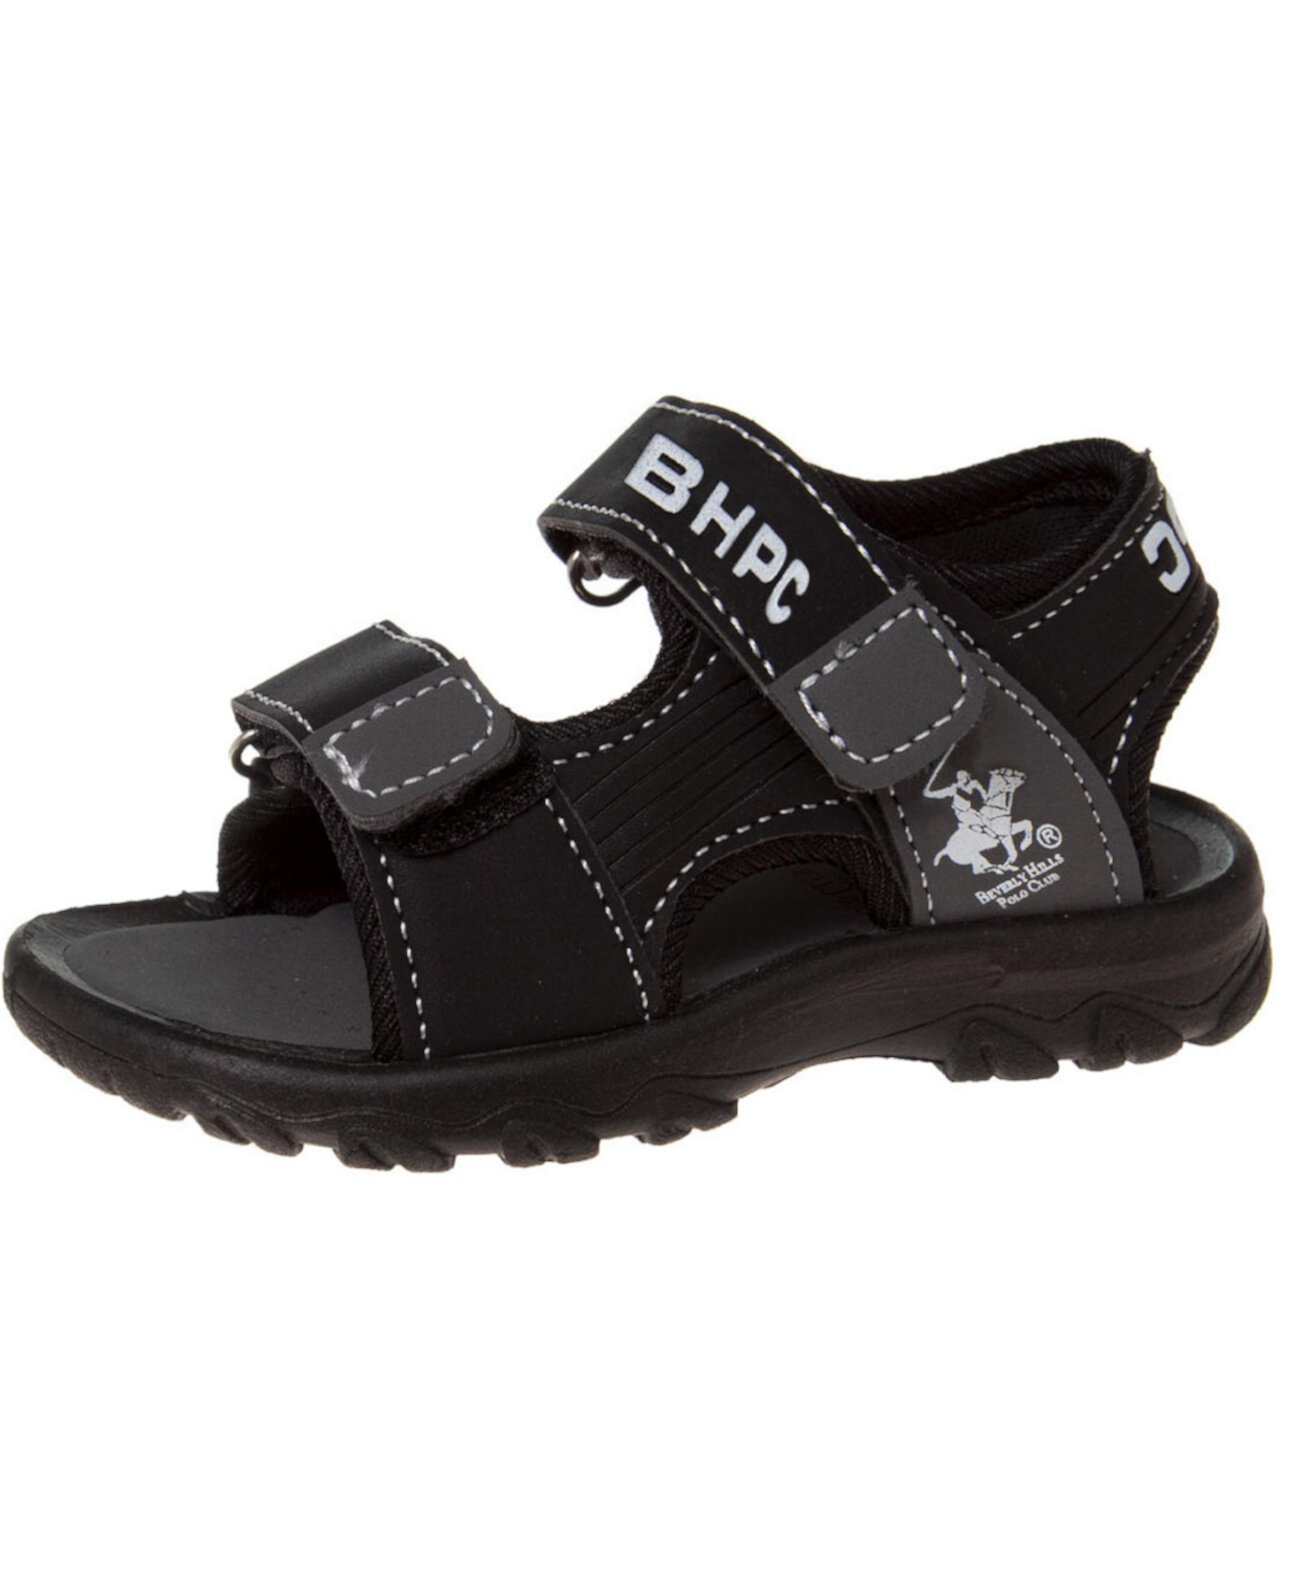 Toddler Double Hook and Loop Sandals Beverly Hills Polo